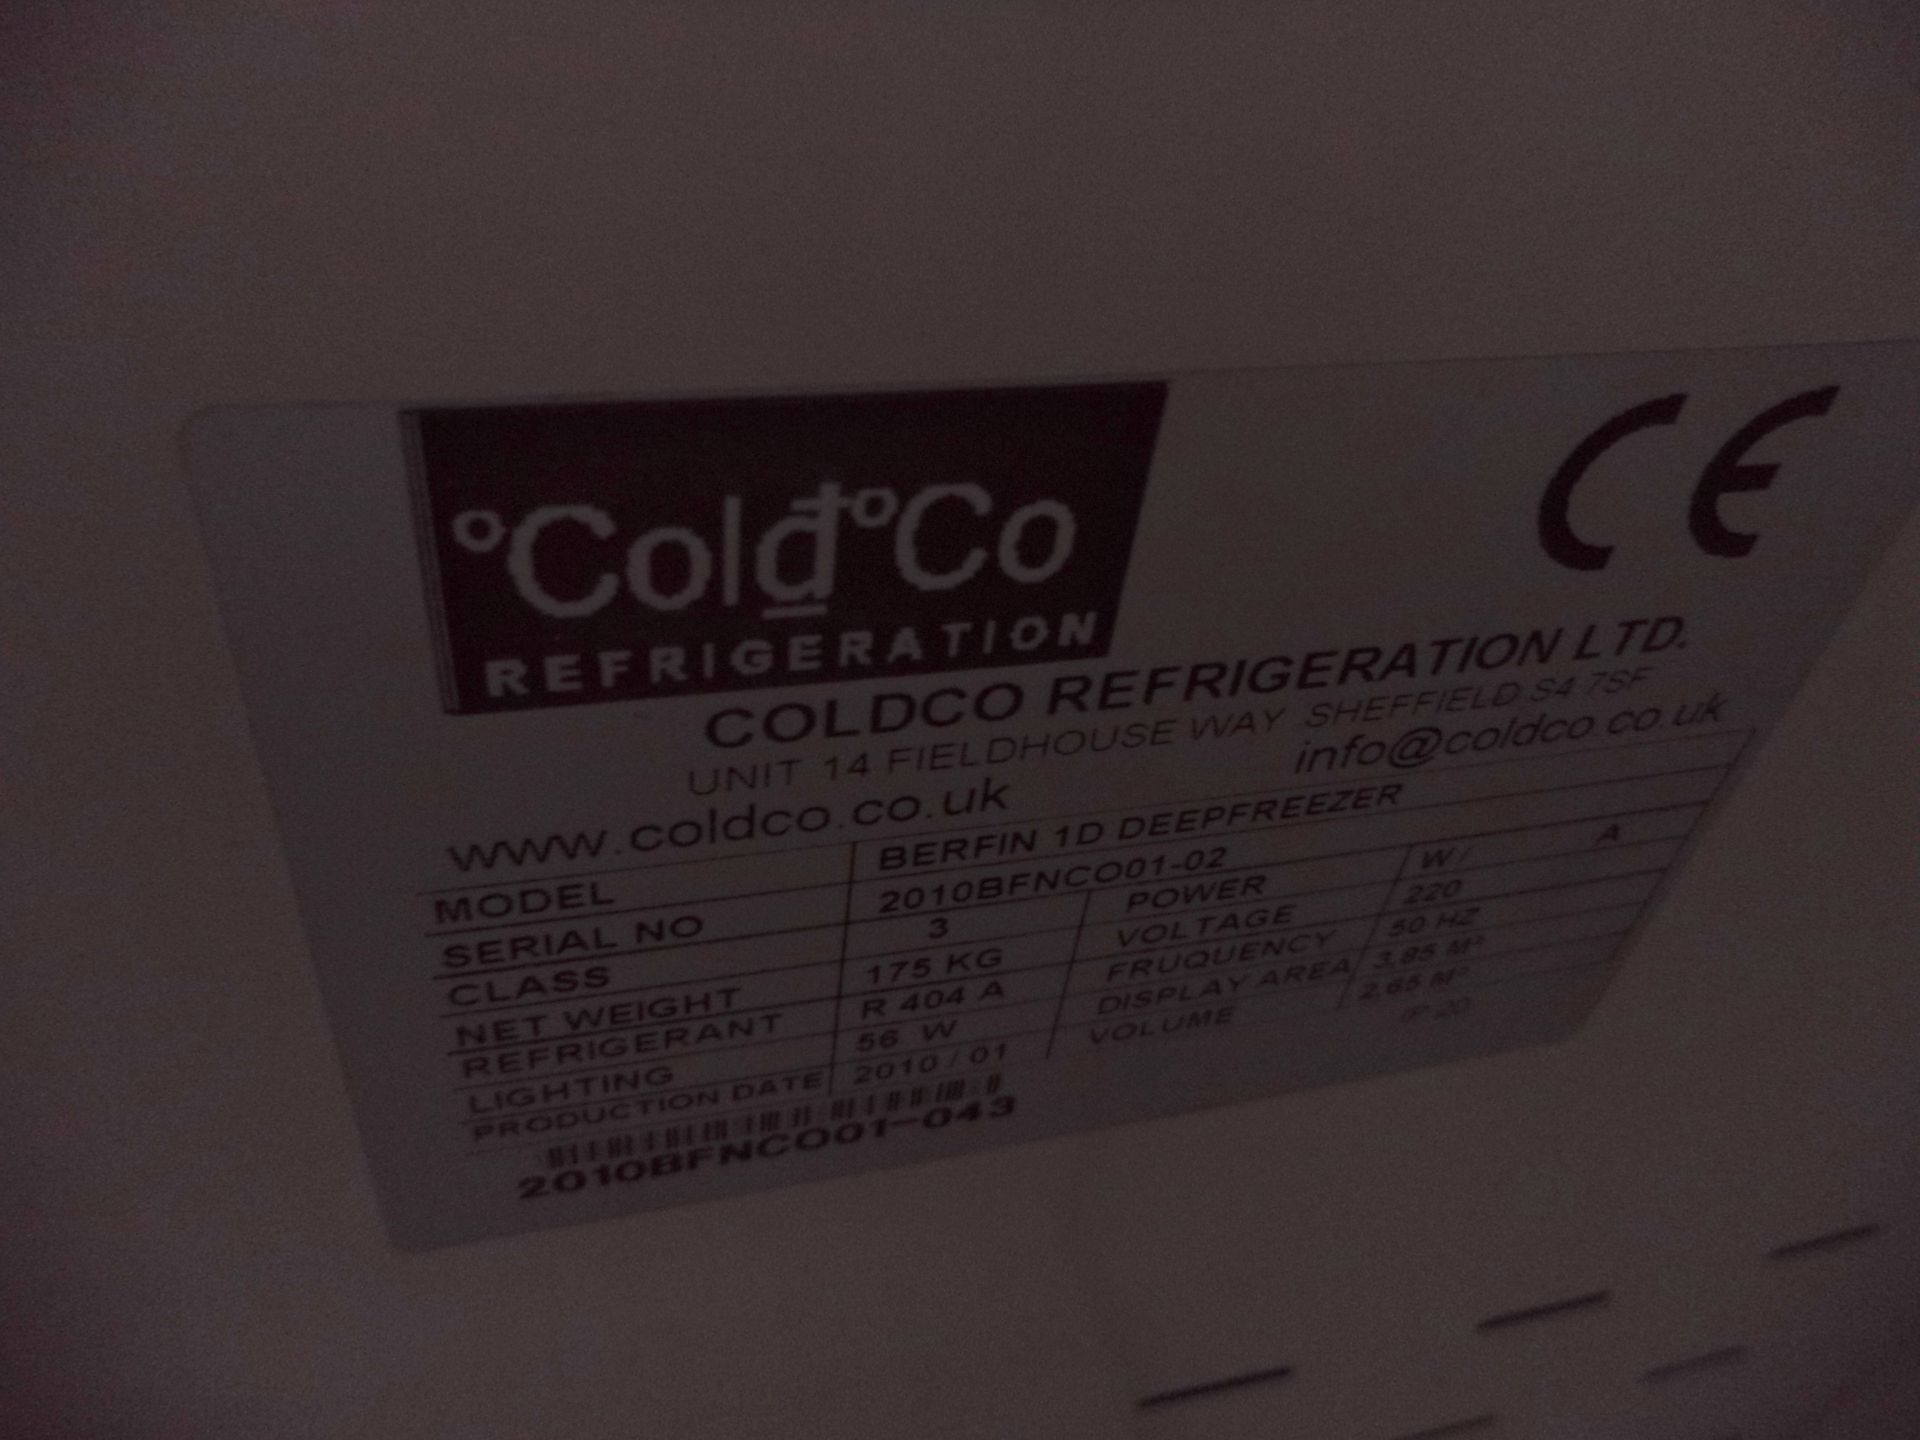 Larged clear door freezer - believed to require an external condenser unit IMPORTANT: Please - Image 3 of 3